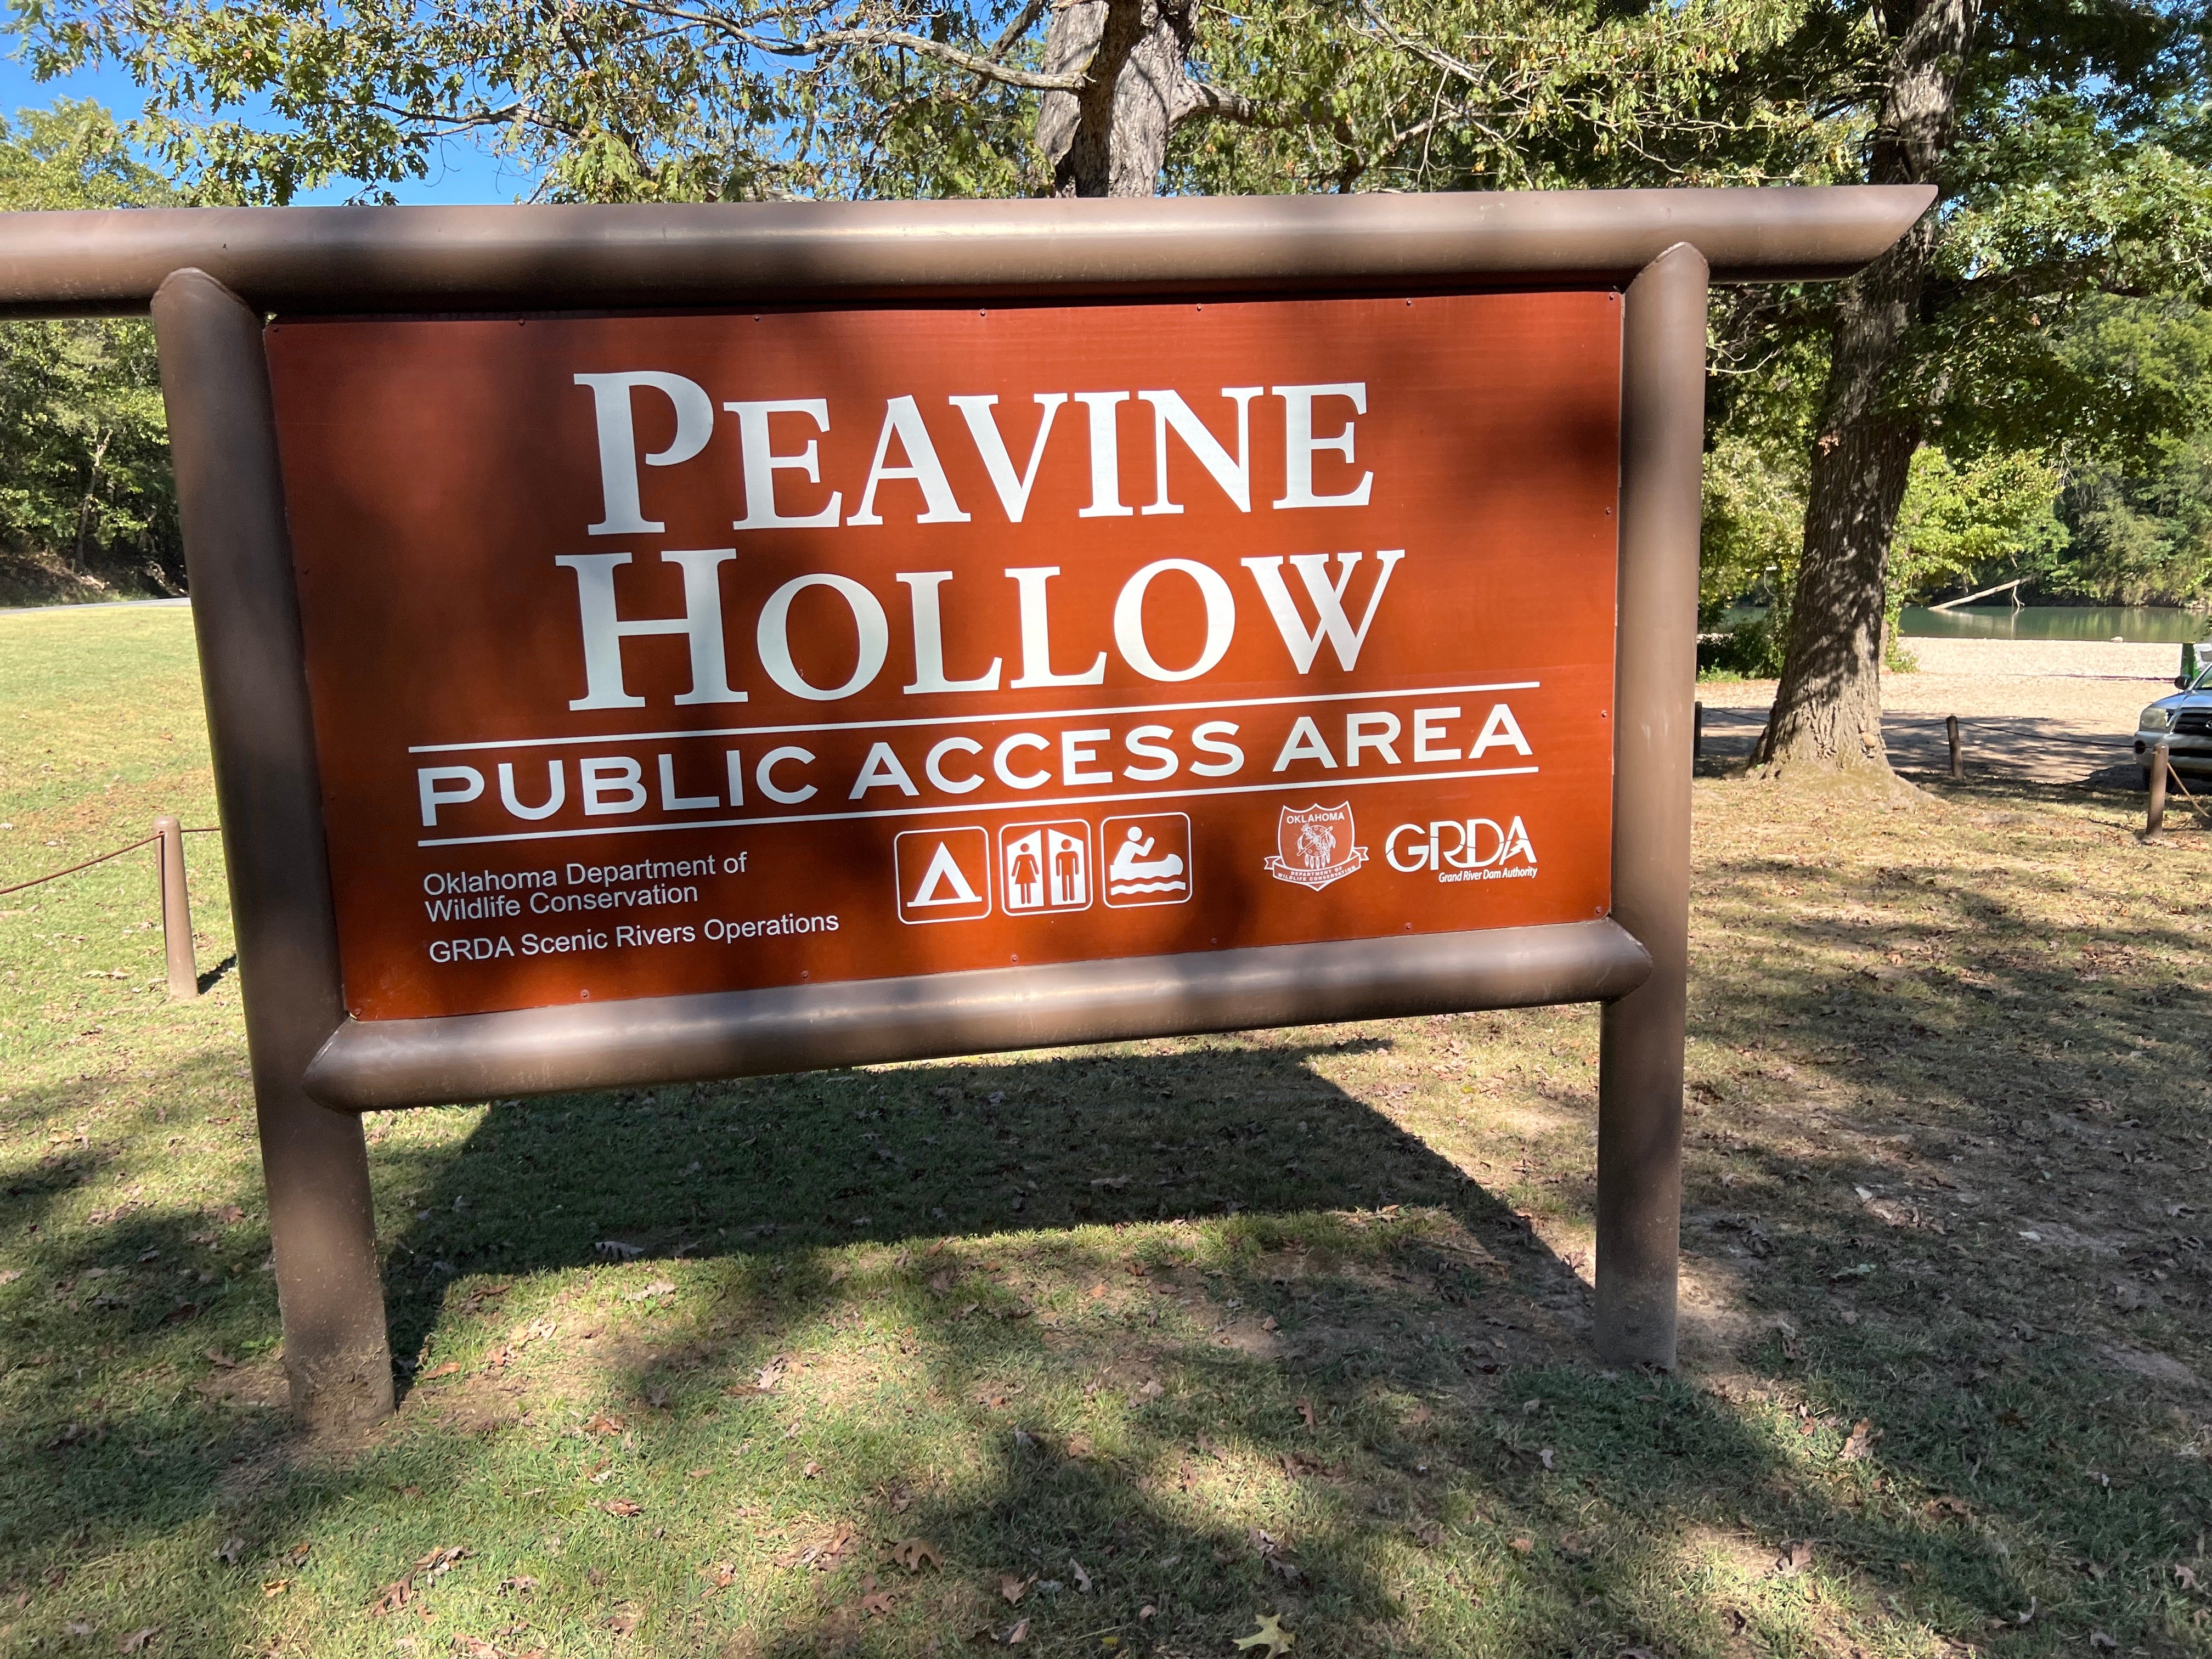 Camper submitted image from Peavine Hollow Public Access Area - 4